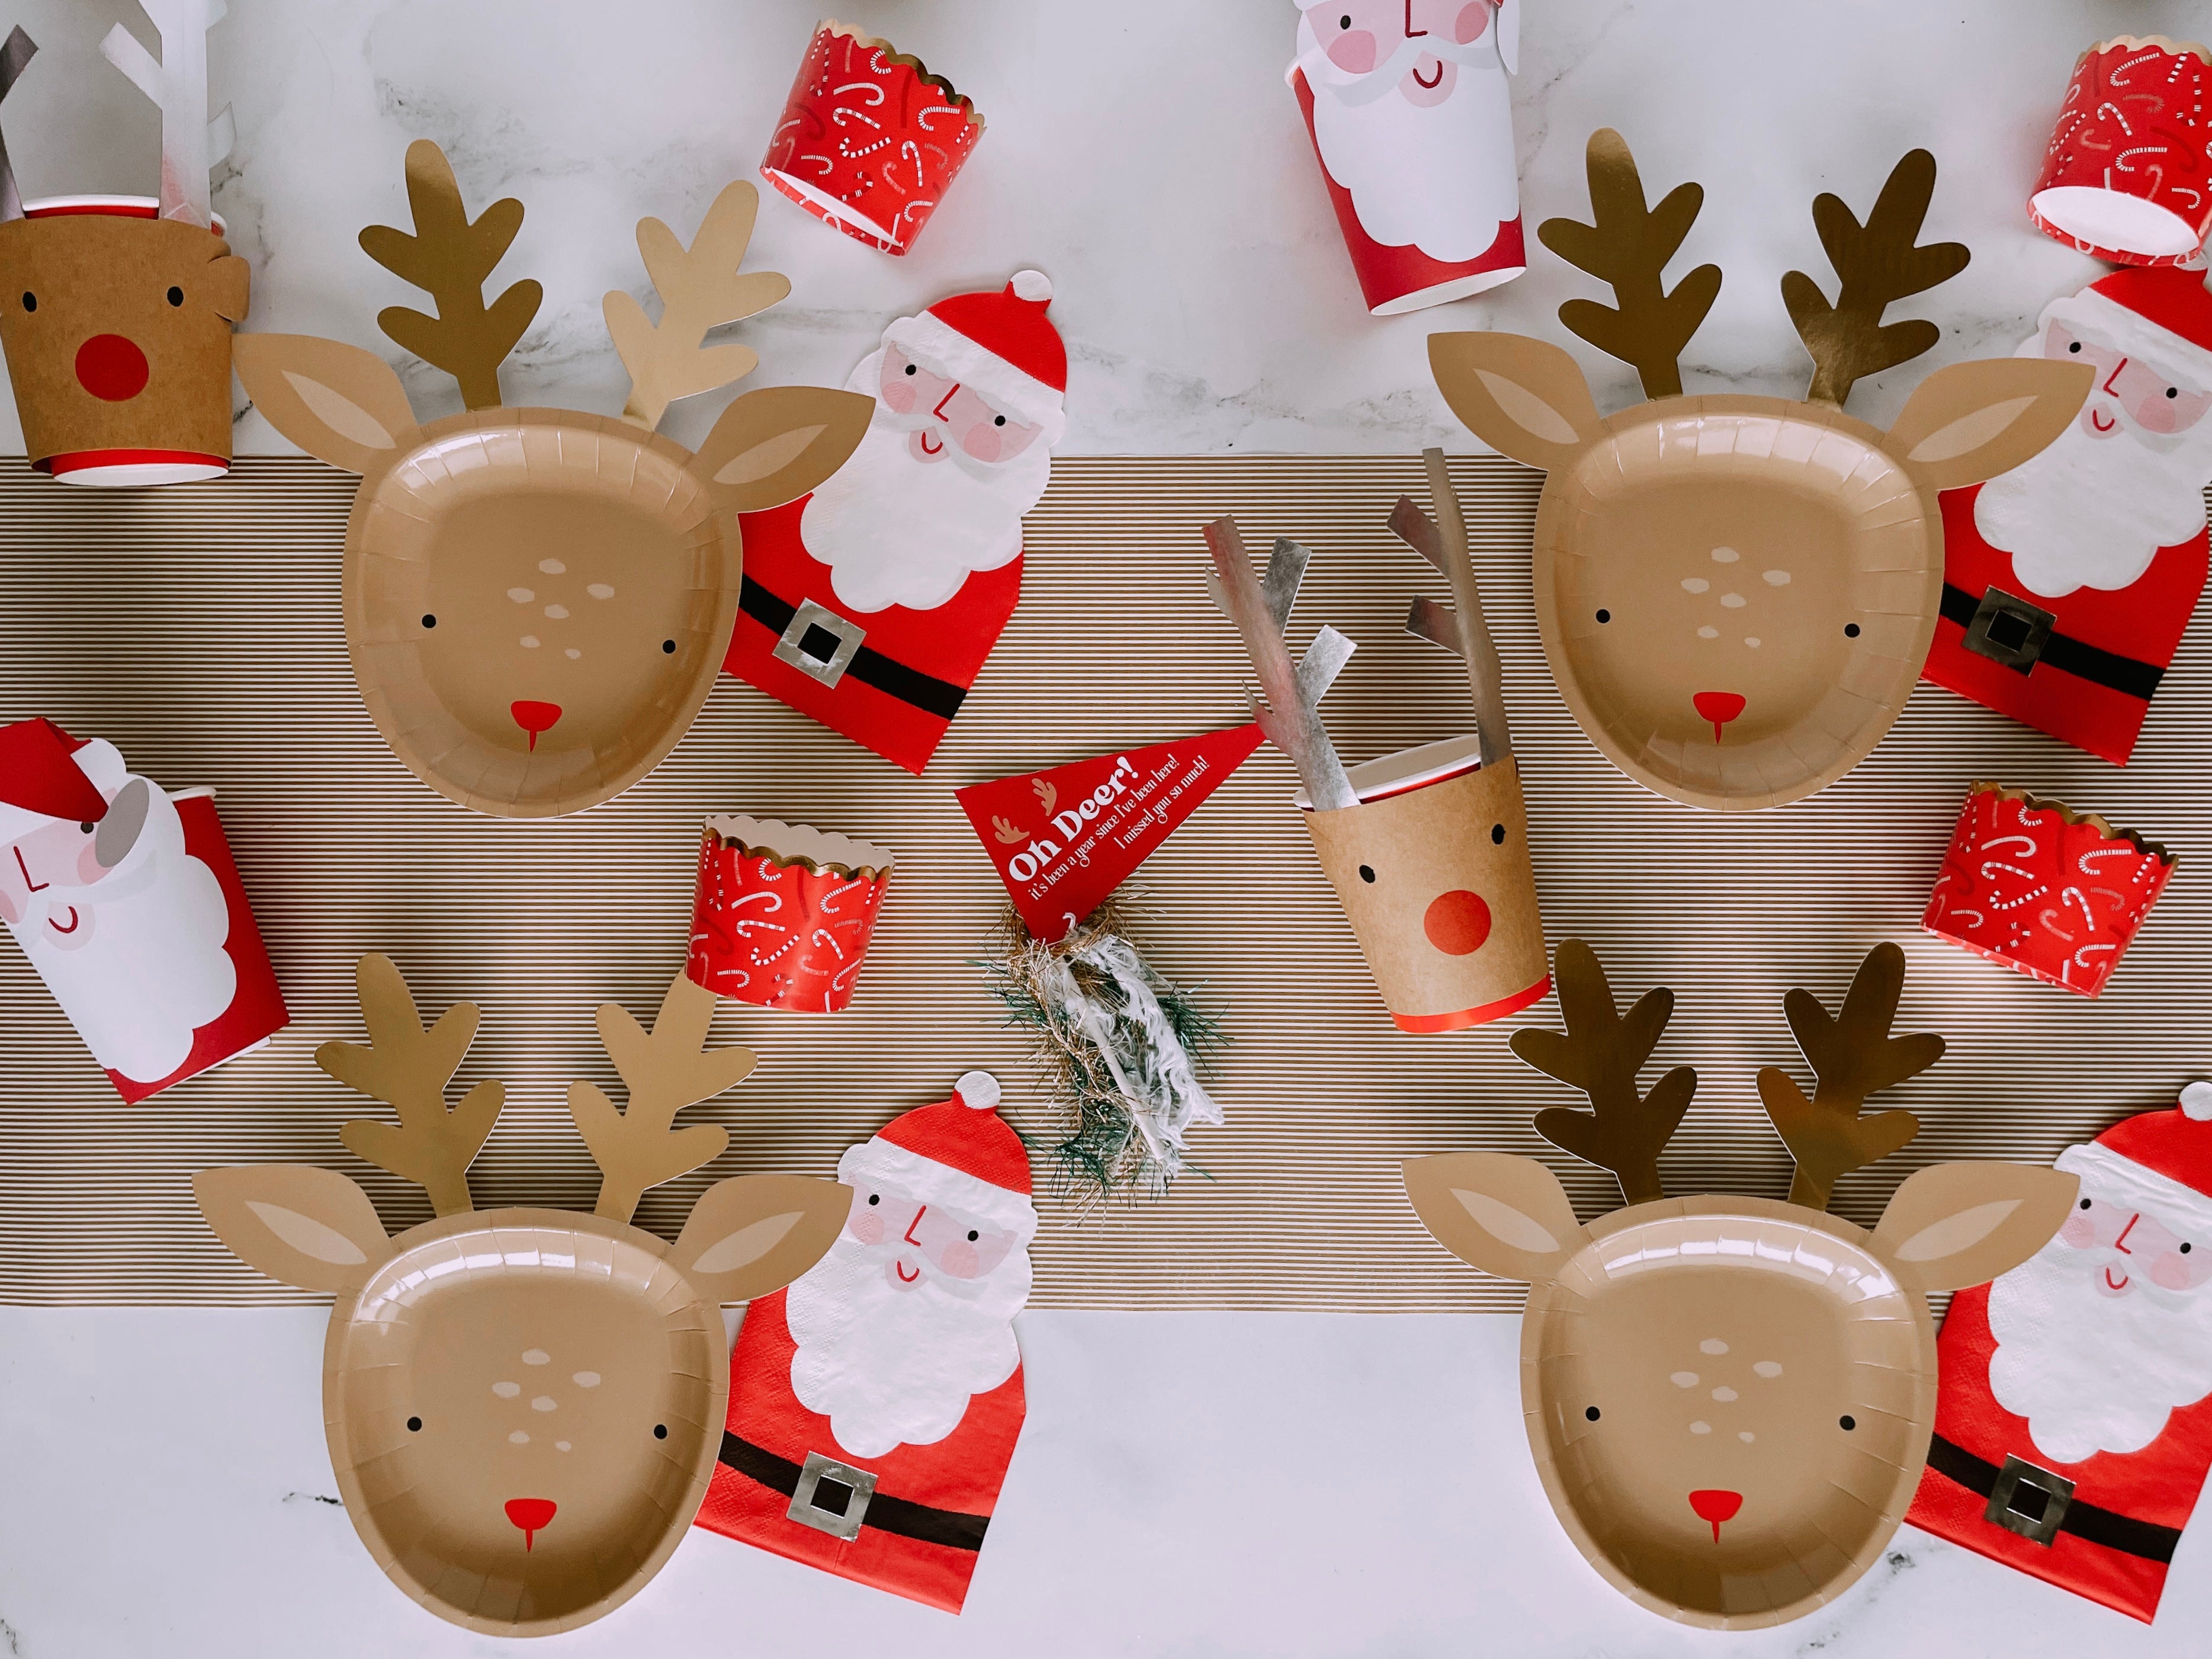 6pcs/box, Christmas Games For The Party-Red White Christmas Tree Reindeer  Elements Inside Paper Hat English Joke Paper Selected Materials, Christmas